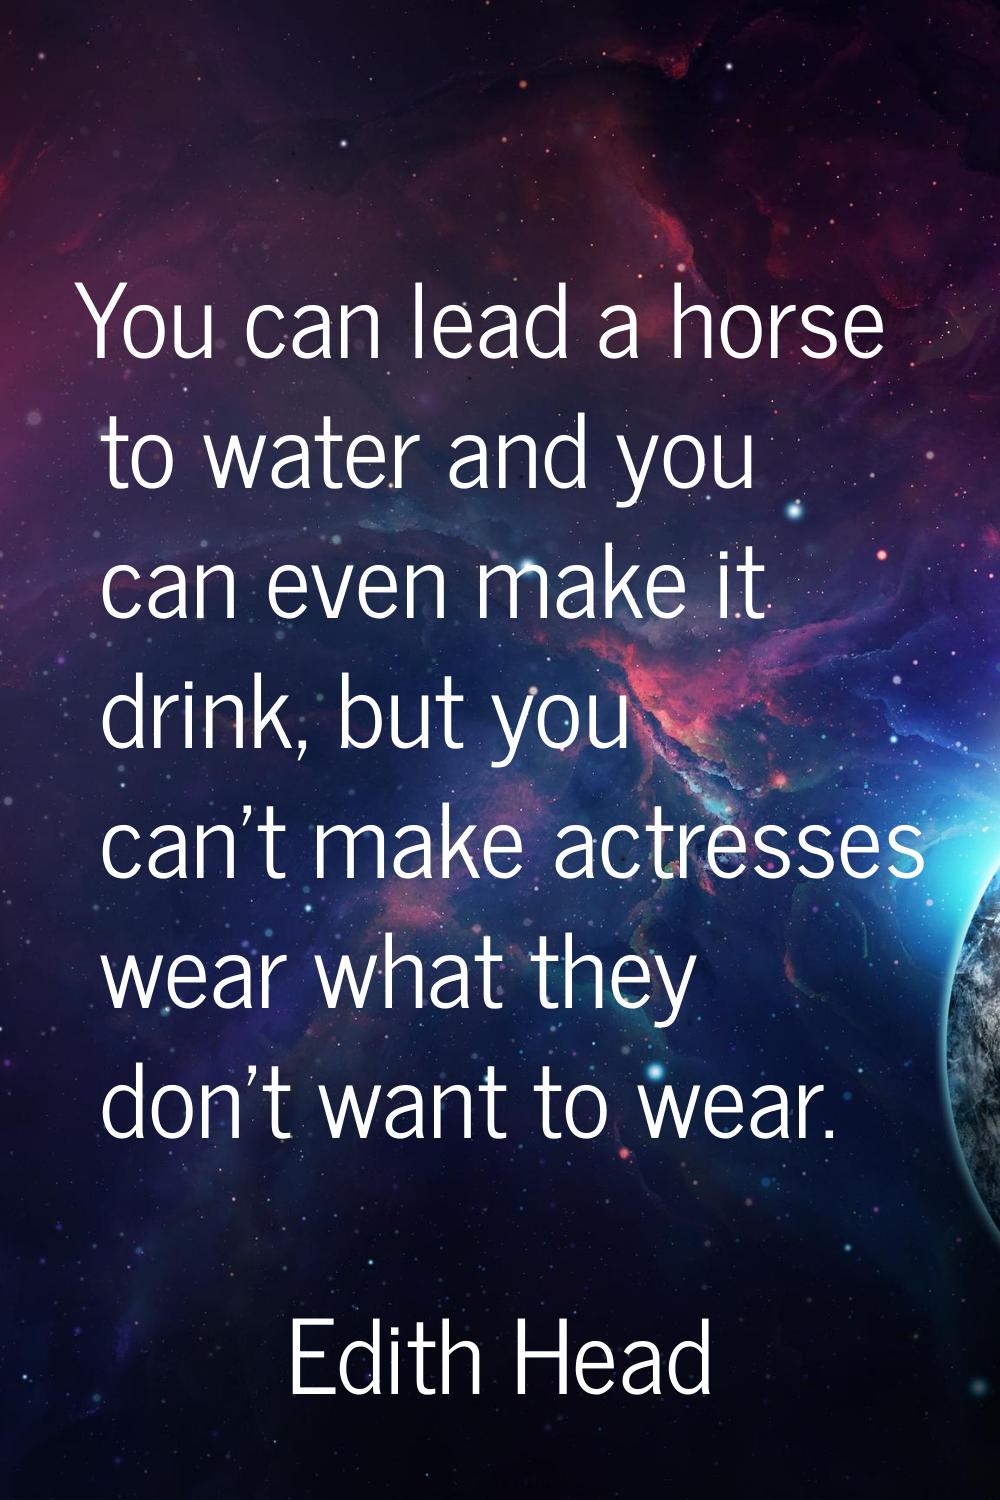 You can lead a horse to water and you can even make it drink, but you can't make actresses wear wha